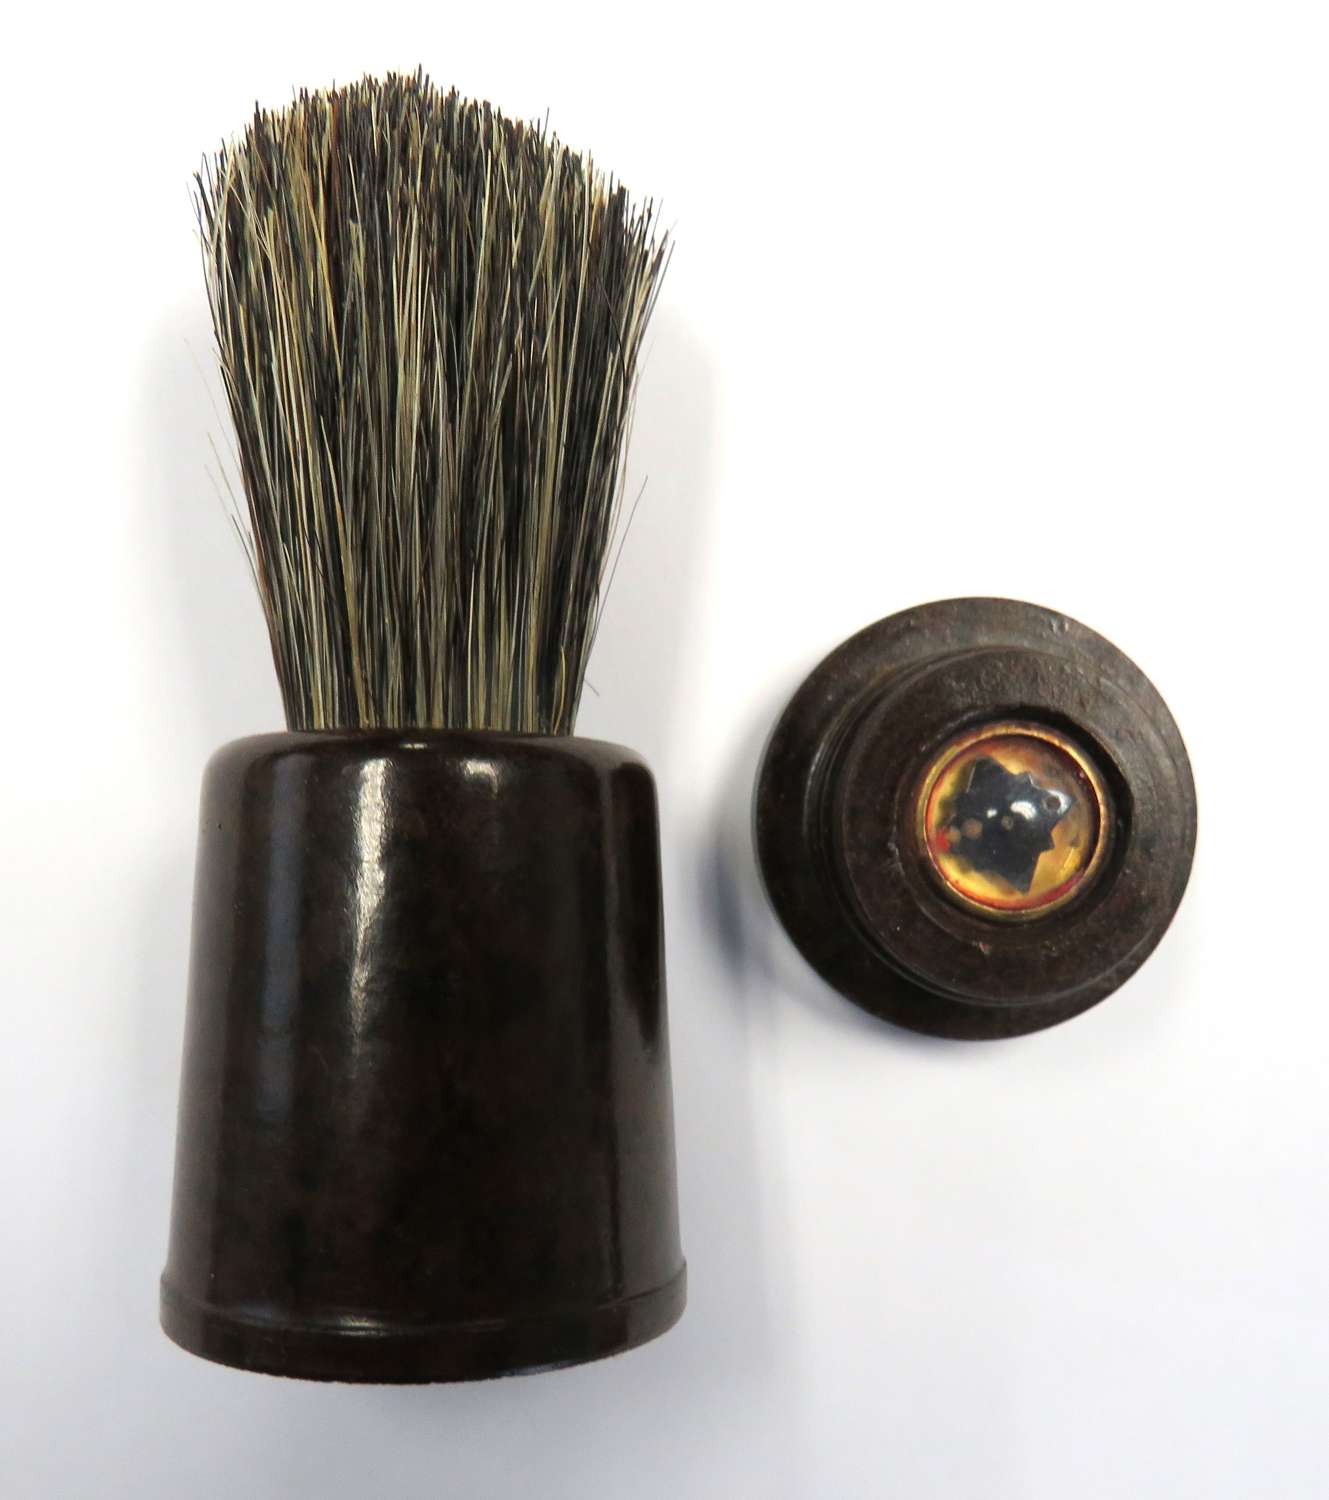 WW2 Escape and Evasion 1943 Shaving Brush and Hidden Compass